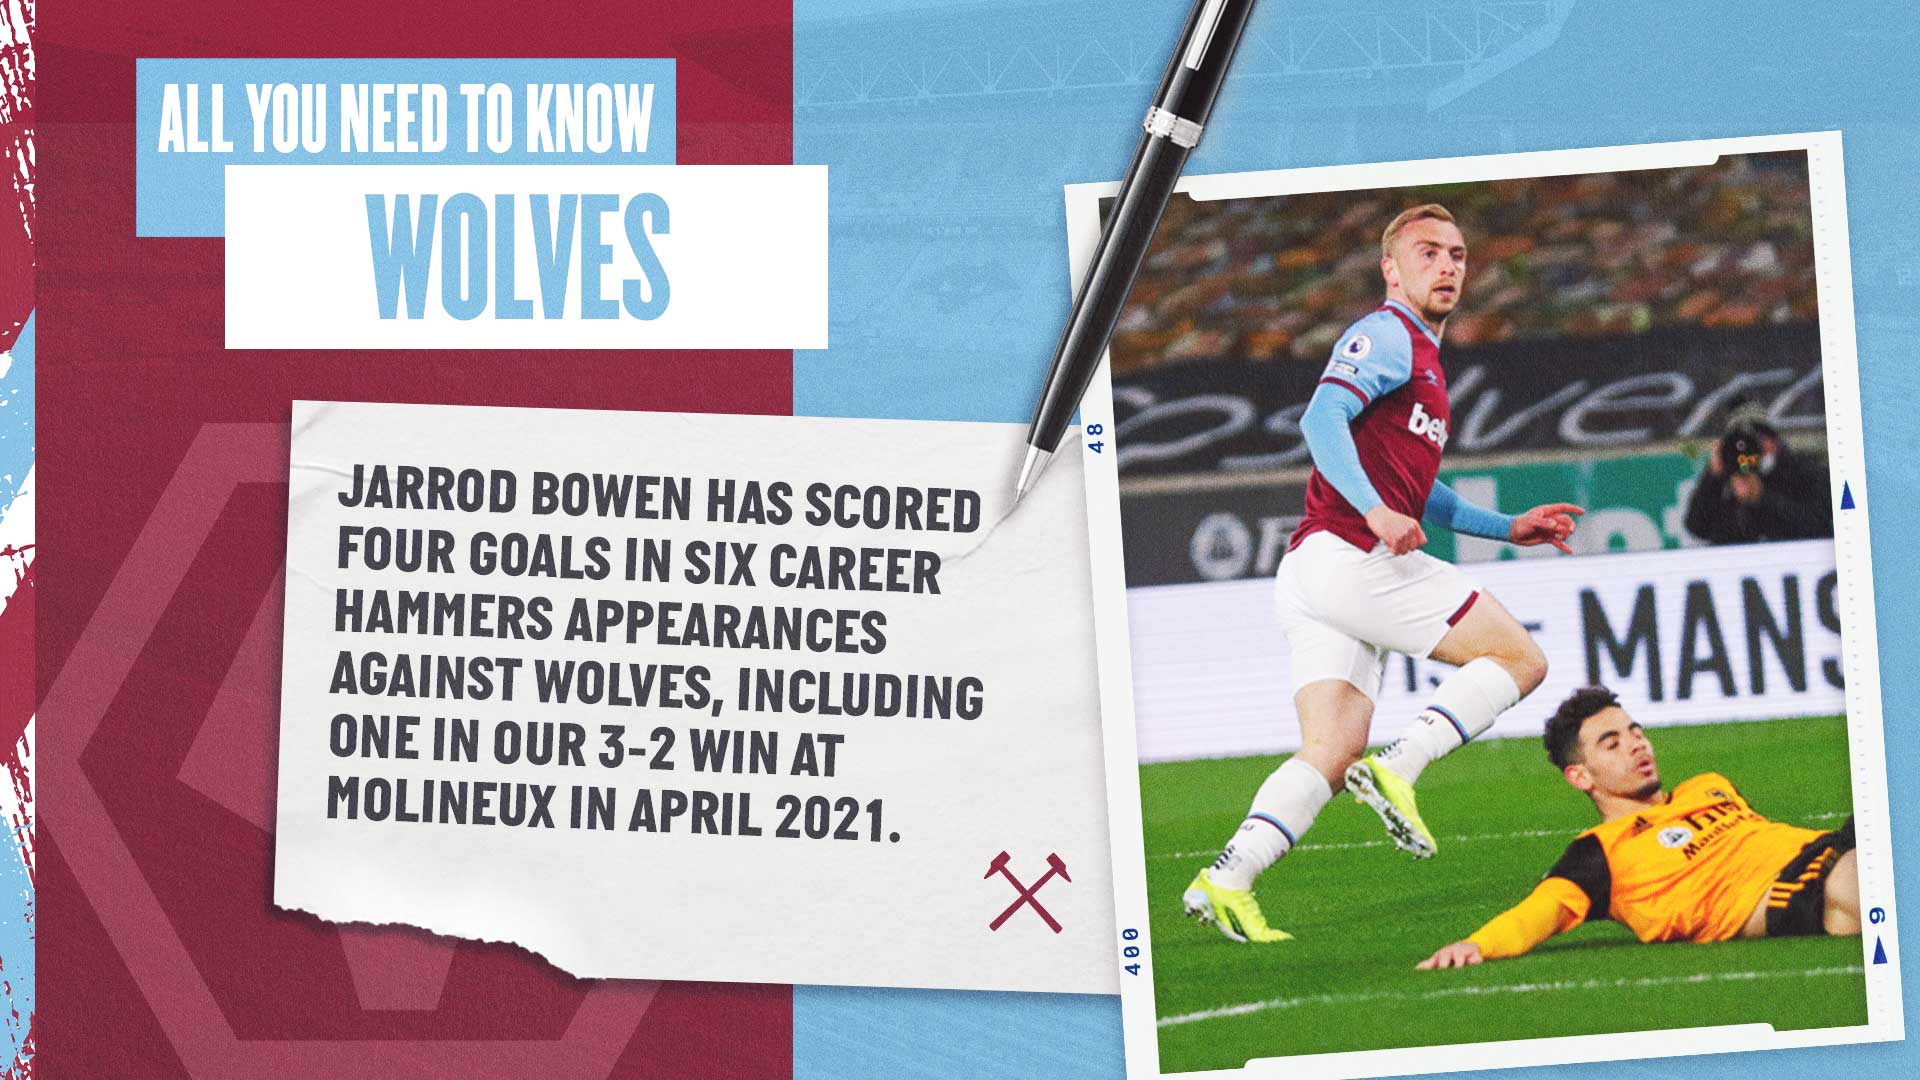 Wolves all you need to know fact 2